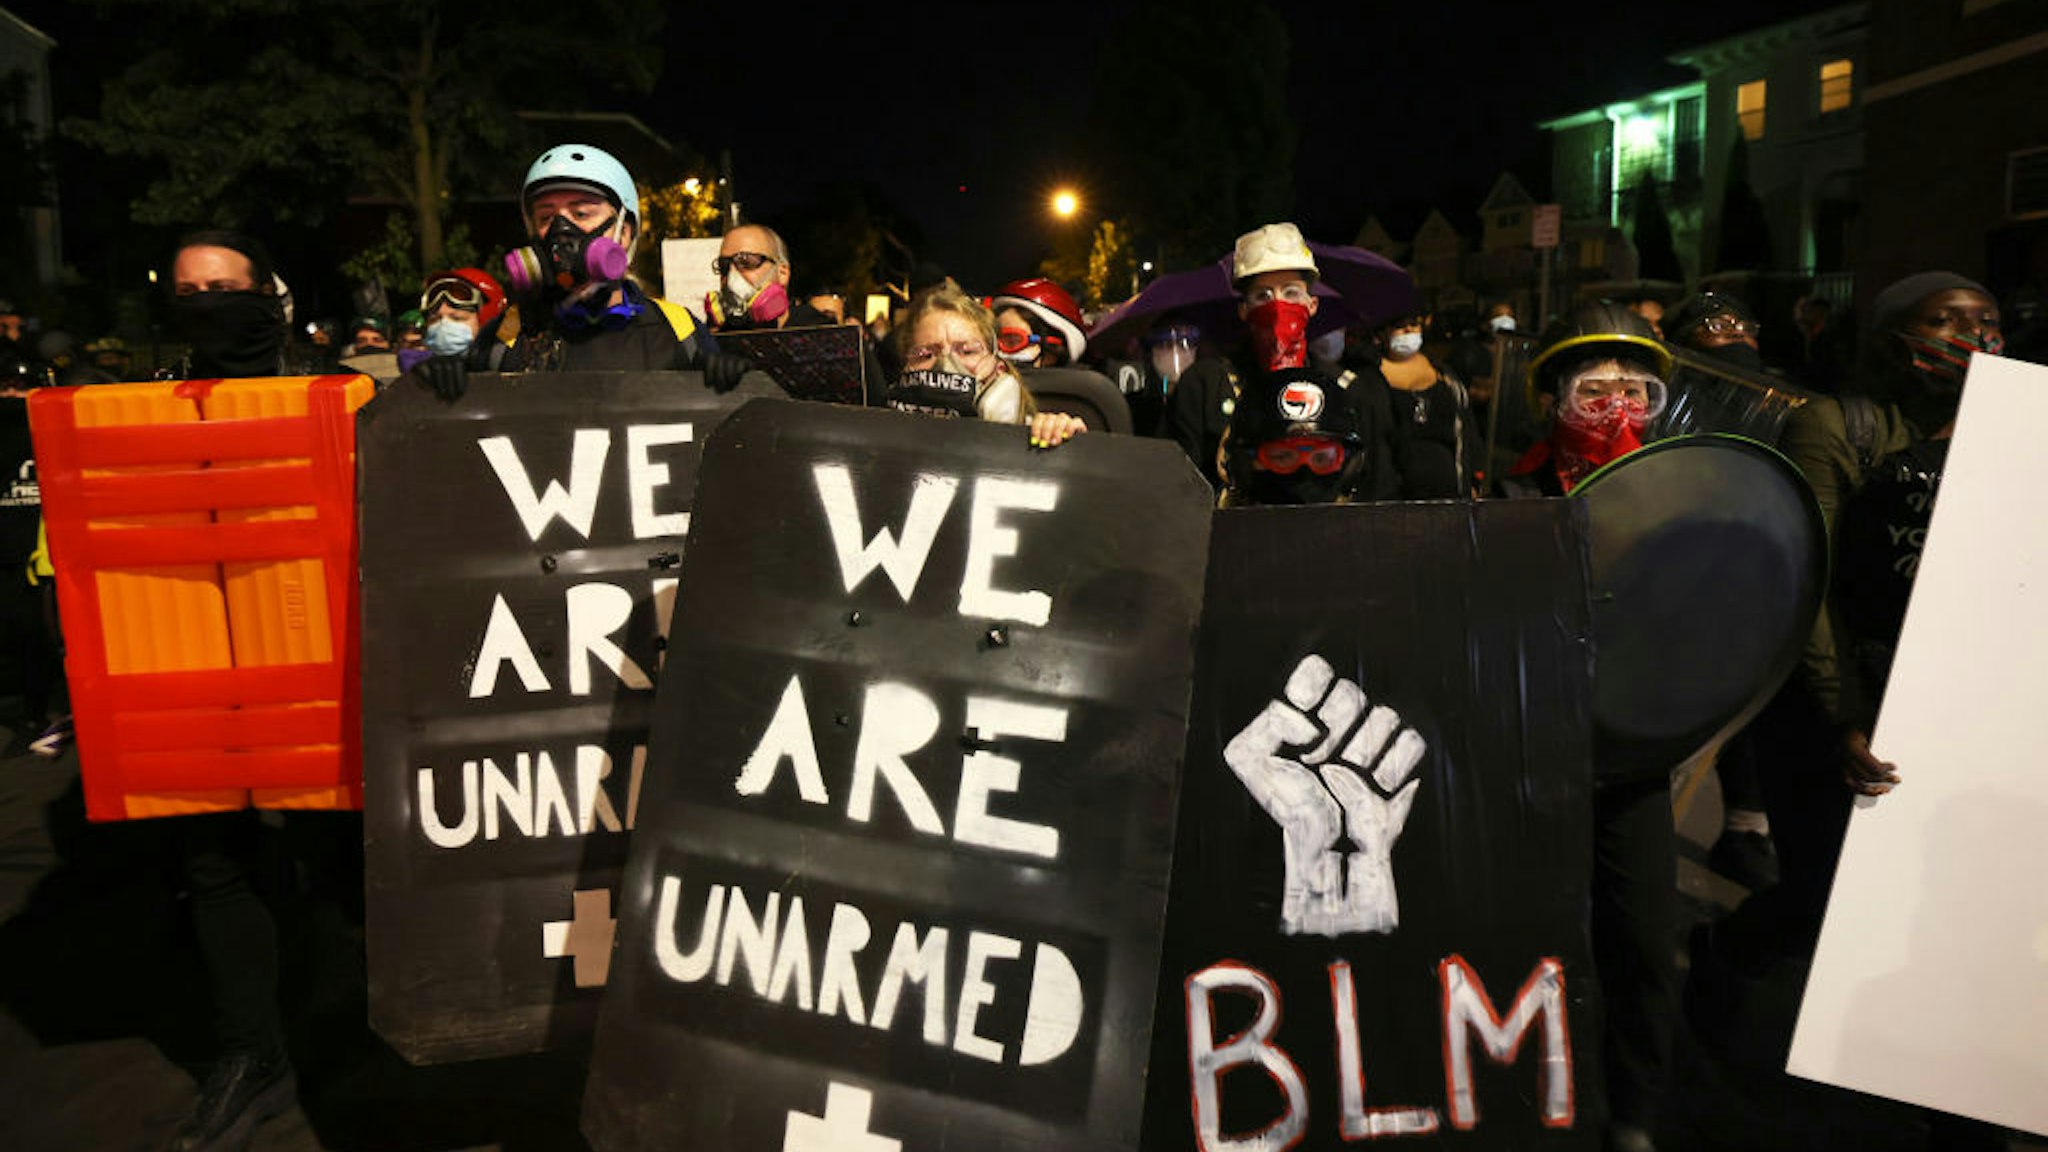 ROCHESTER, NEW YORK - SEPTEMBER 06: Demonstrators hold up homemade shields as they march towards the Public Safety building for Daniel Prude on September 06, 2020 in Rochester, New York. Prude died after being arrested on March 23 by Rochester police officers who had placed a "spit hood" over his head and pinned him to the ground while restraining him. This is the fifth consecutive night of protesting since the family released bodycam footage of Mr. Prude's arrest. (Photo by Michael M. Santiago/Getty Images)